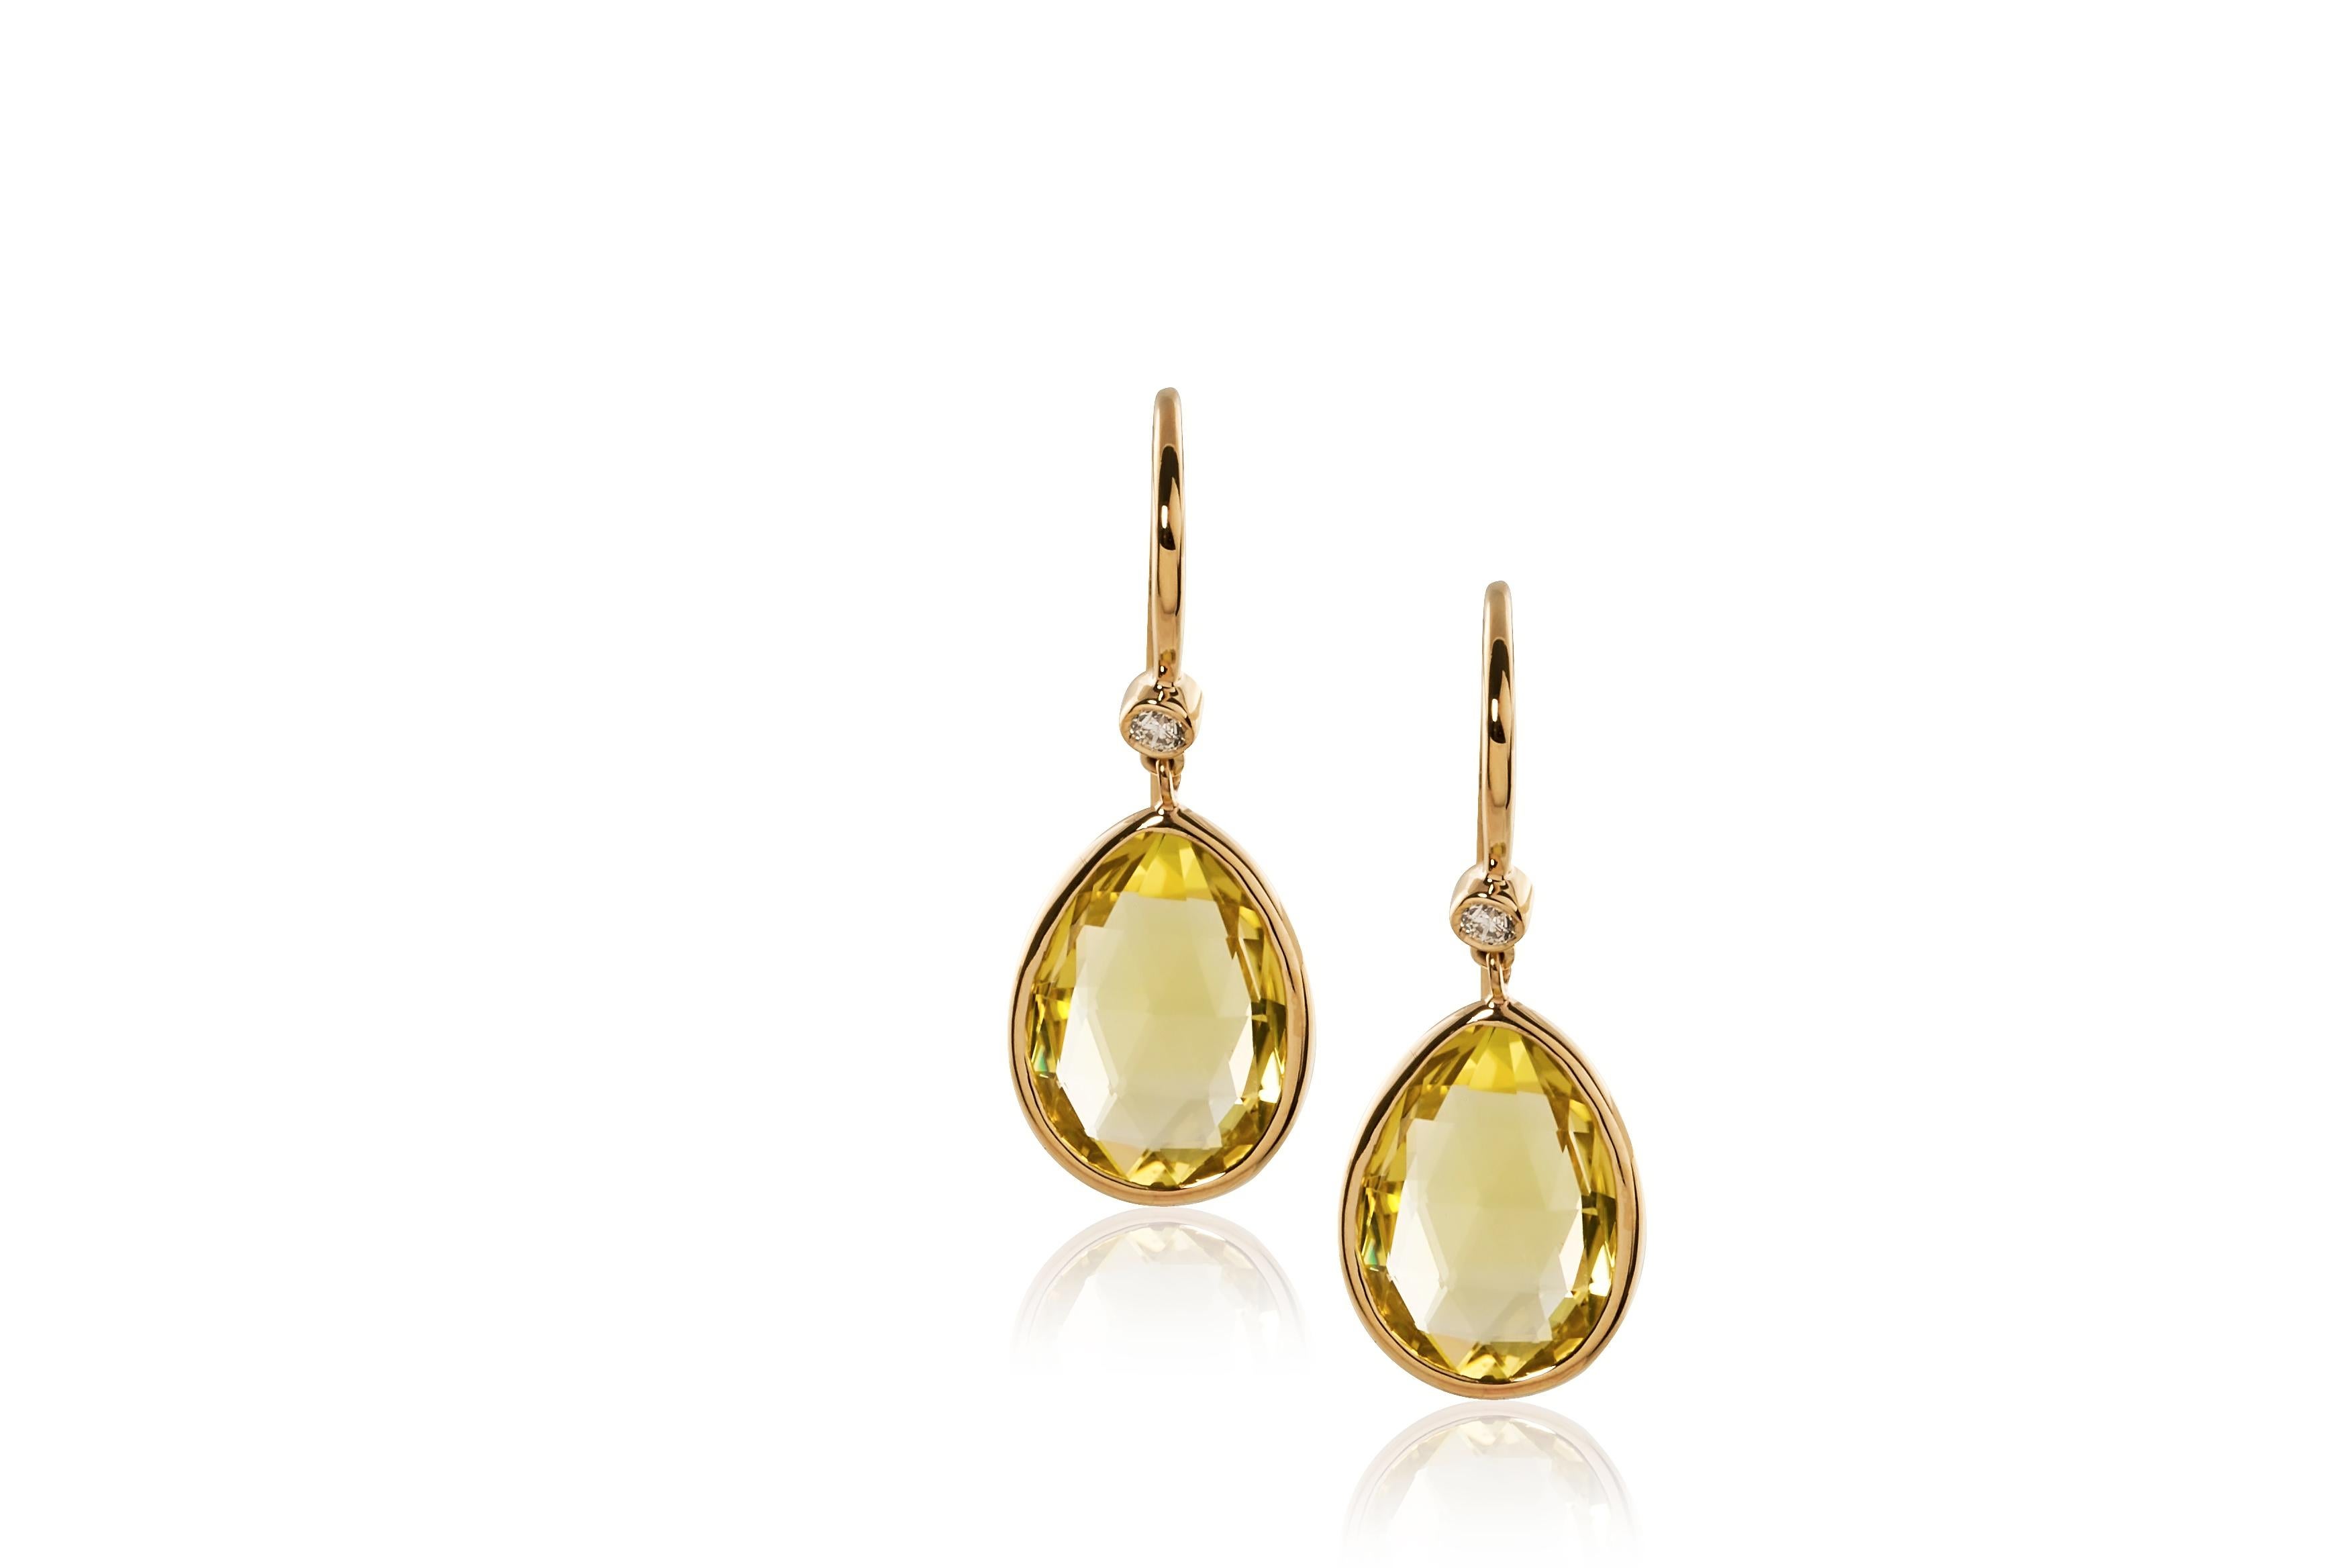 Lemon Quartz Pear Shape Briolette Earrings with Diamonds on French Wire in 18K Yellow Gold, from ‘Gossip’ Collection

Stone Size: 10 x 14 mm 

Gemstone Approx. Wt: Lemon Quartz- 10.52 Carats 

Diamonds: G-H / VS, Approx. Wt: 0.11 Carats